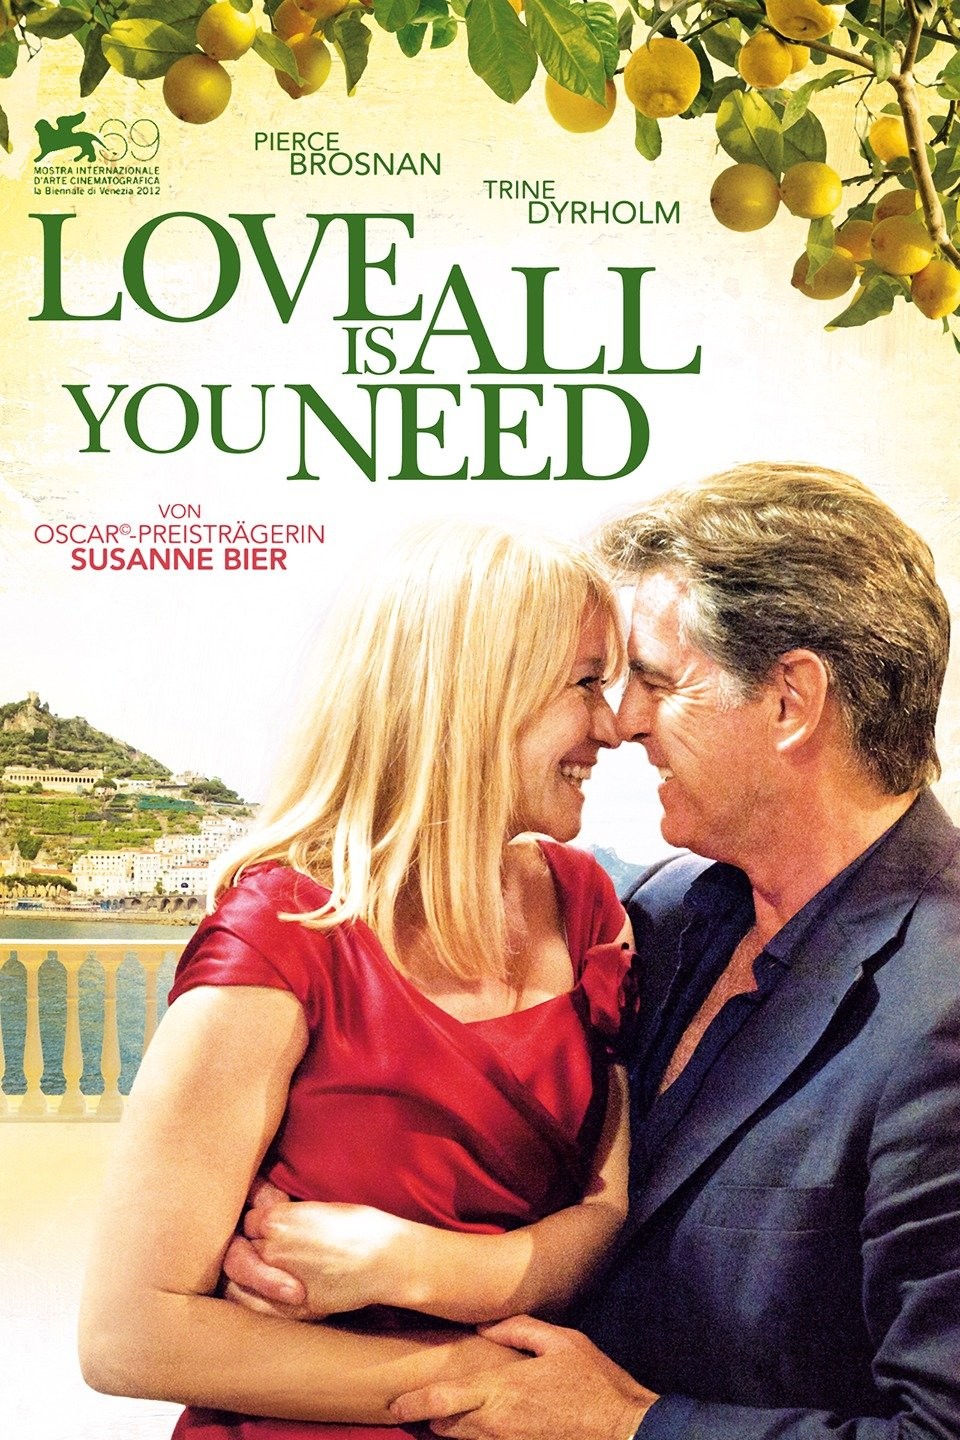 Love Is All You Need? - Rotten Tomatoes